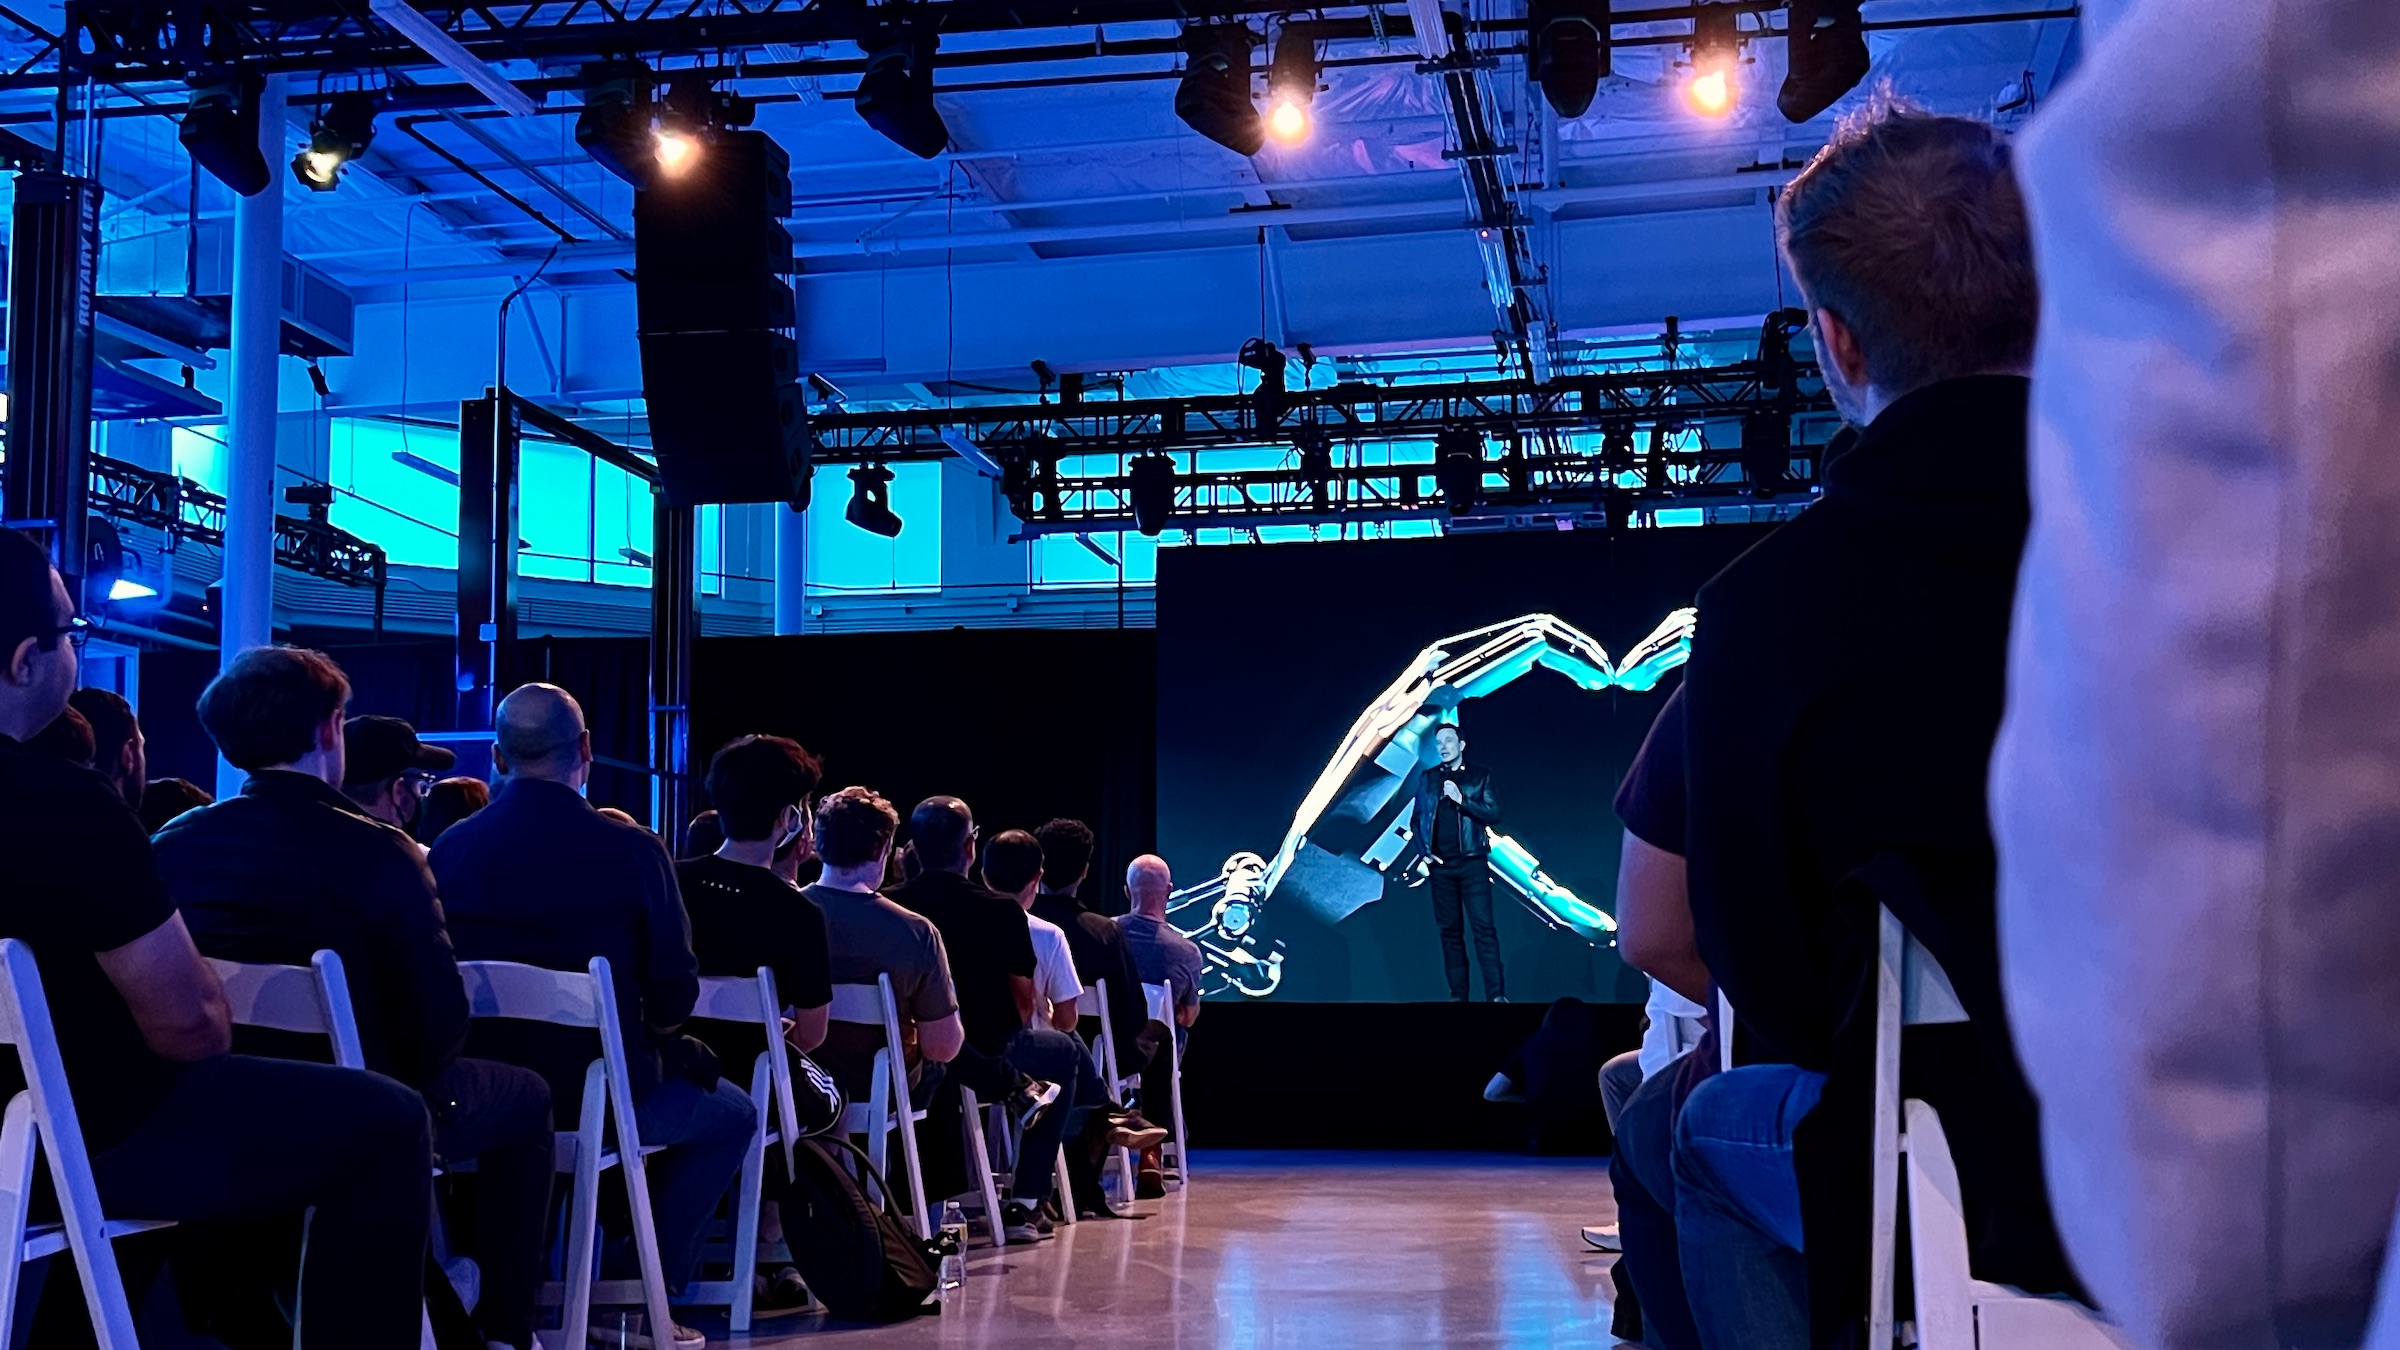 Elon Musk stands on a stage in front of a screen. He addresses a seated audience.